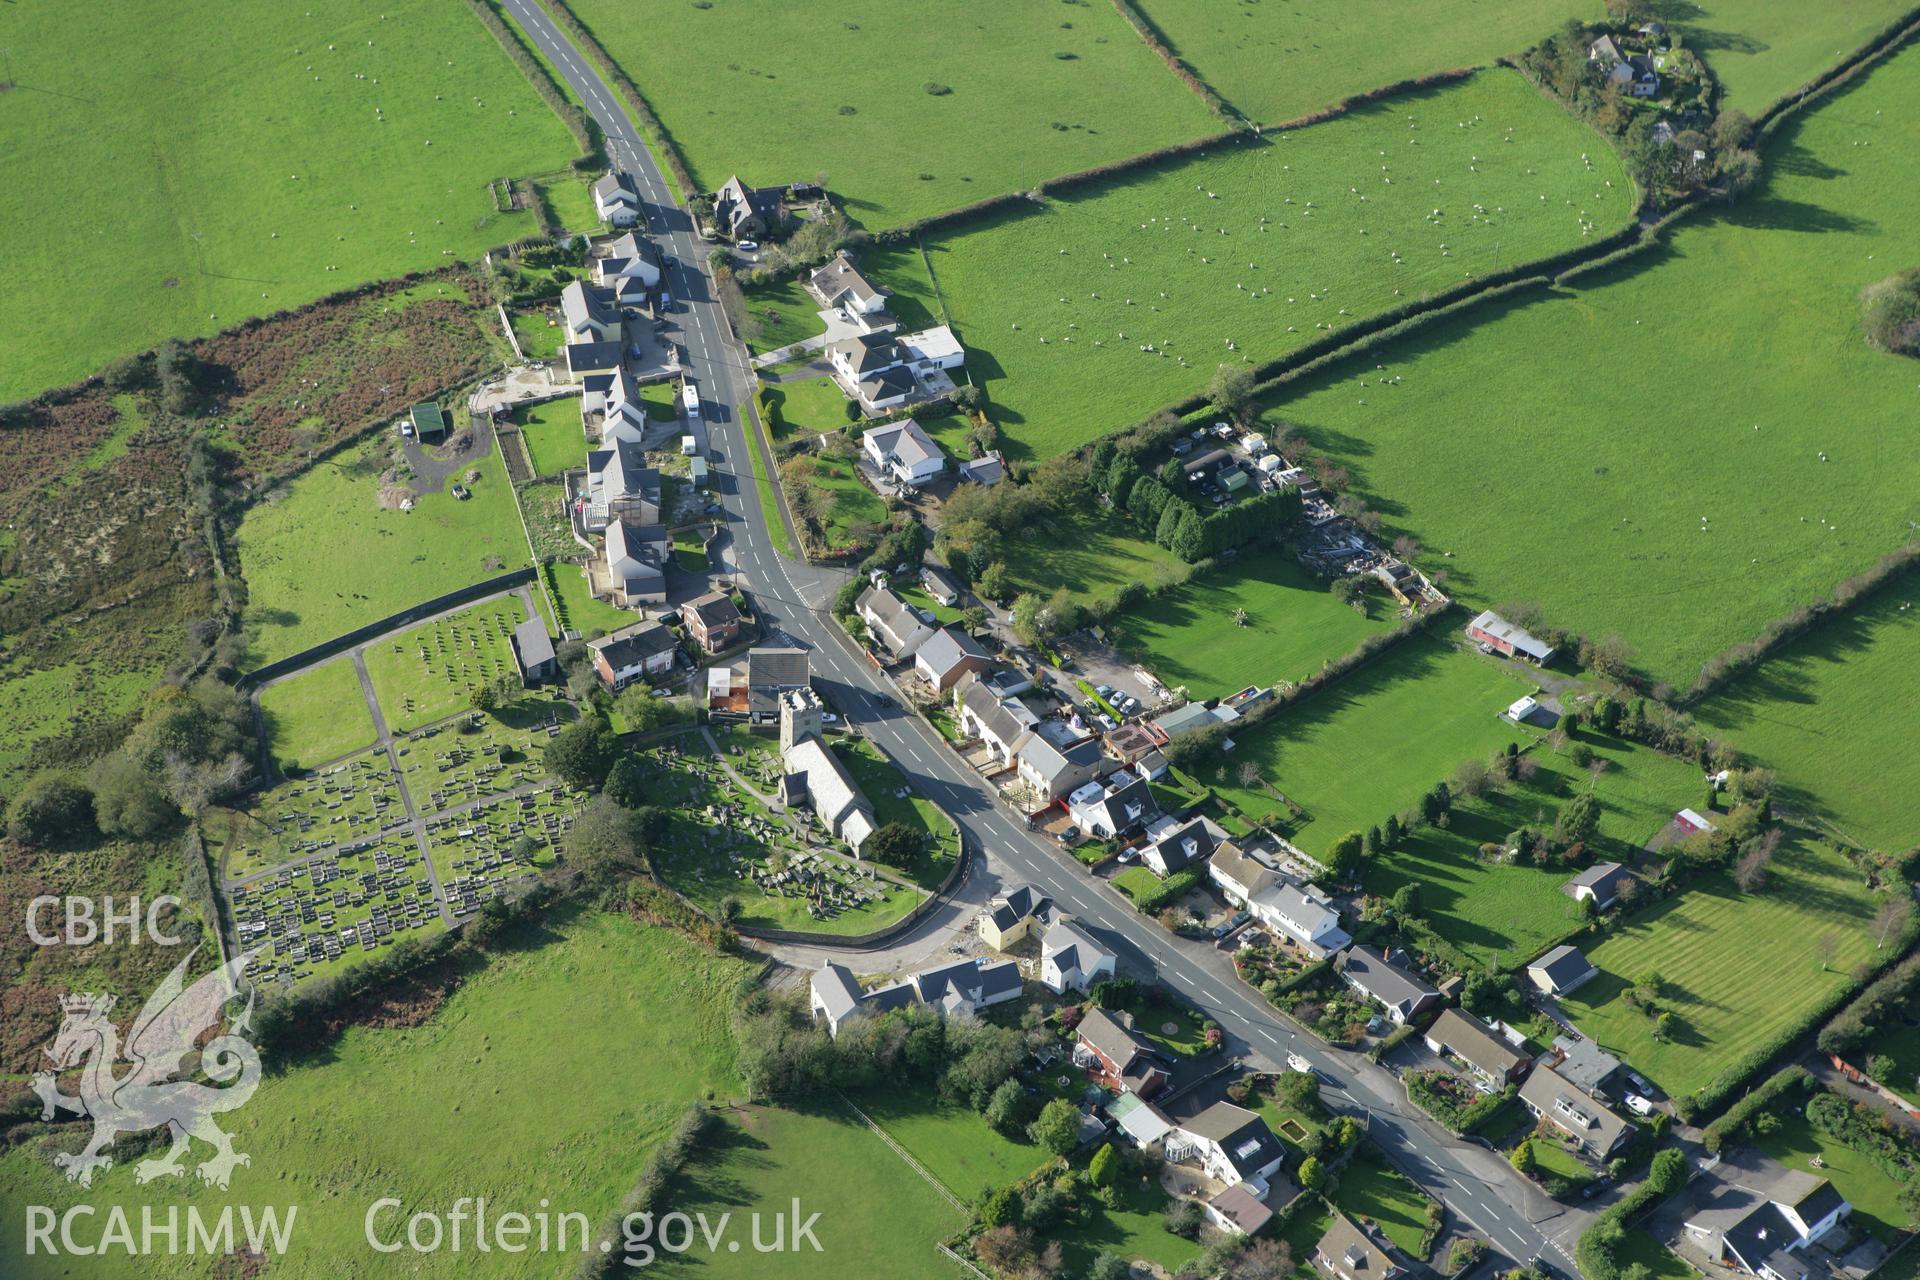 RCAHMW colour oblique photograph of Glynogwr village, with St Tyfodwg's Church. Taken by Toby Driver on 16/10/2008.